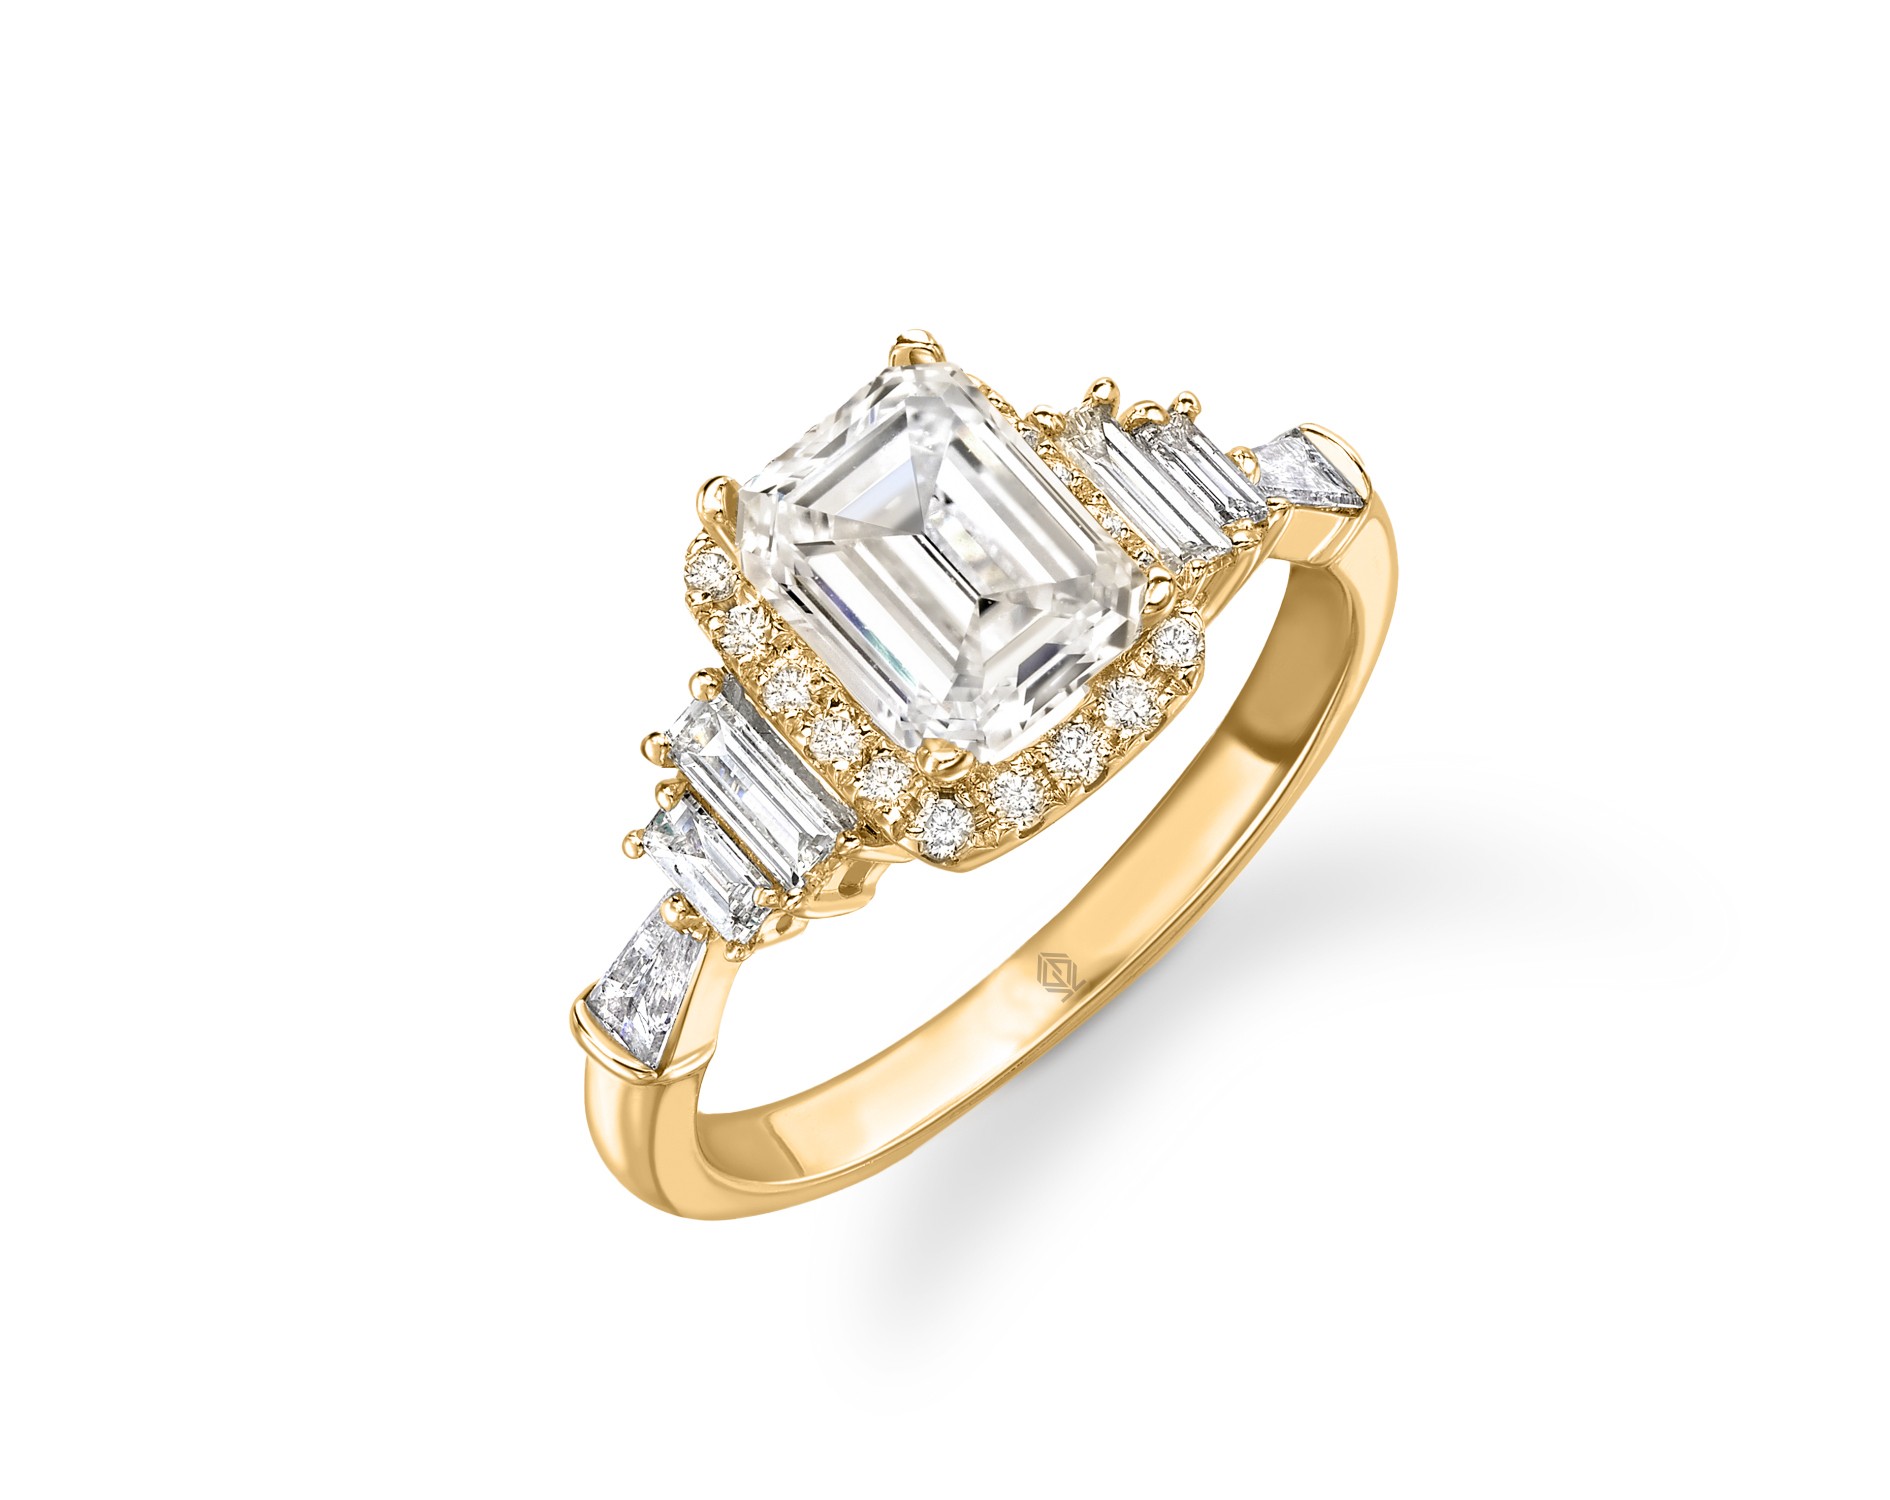 18K YELLOW GOLD EMERALD CUT DIAMOND RING WITH EMERALD SIDE STONES